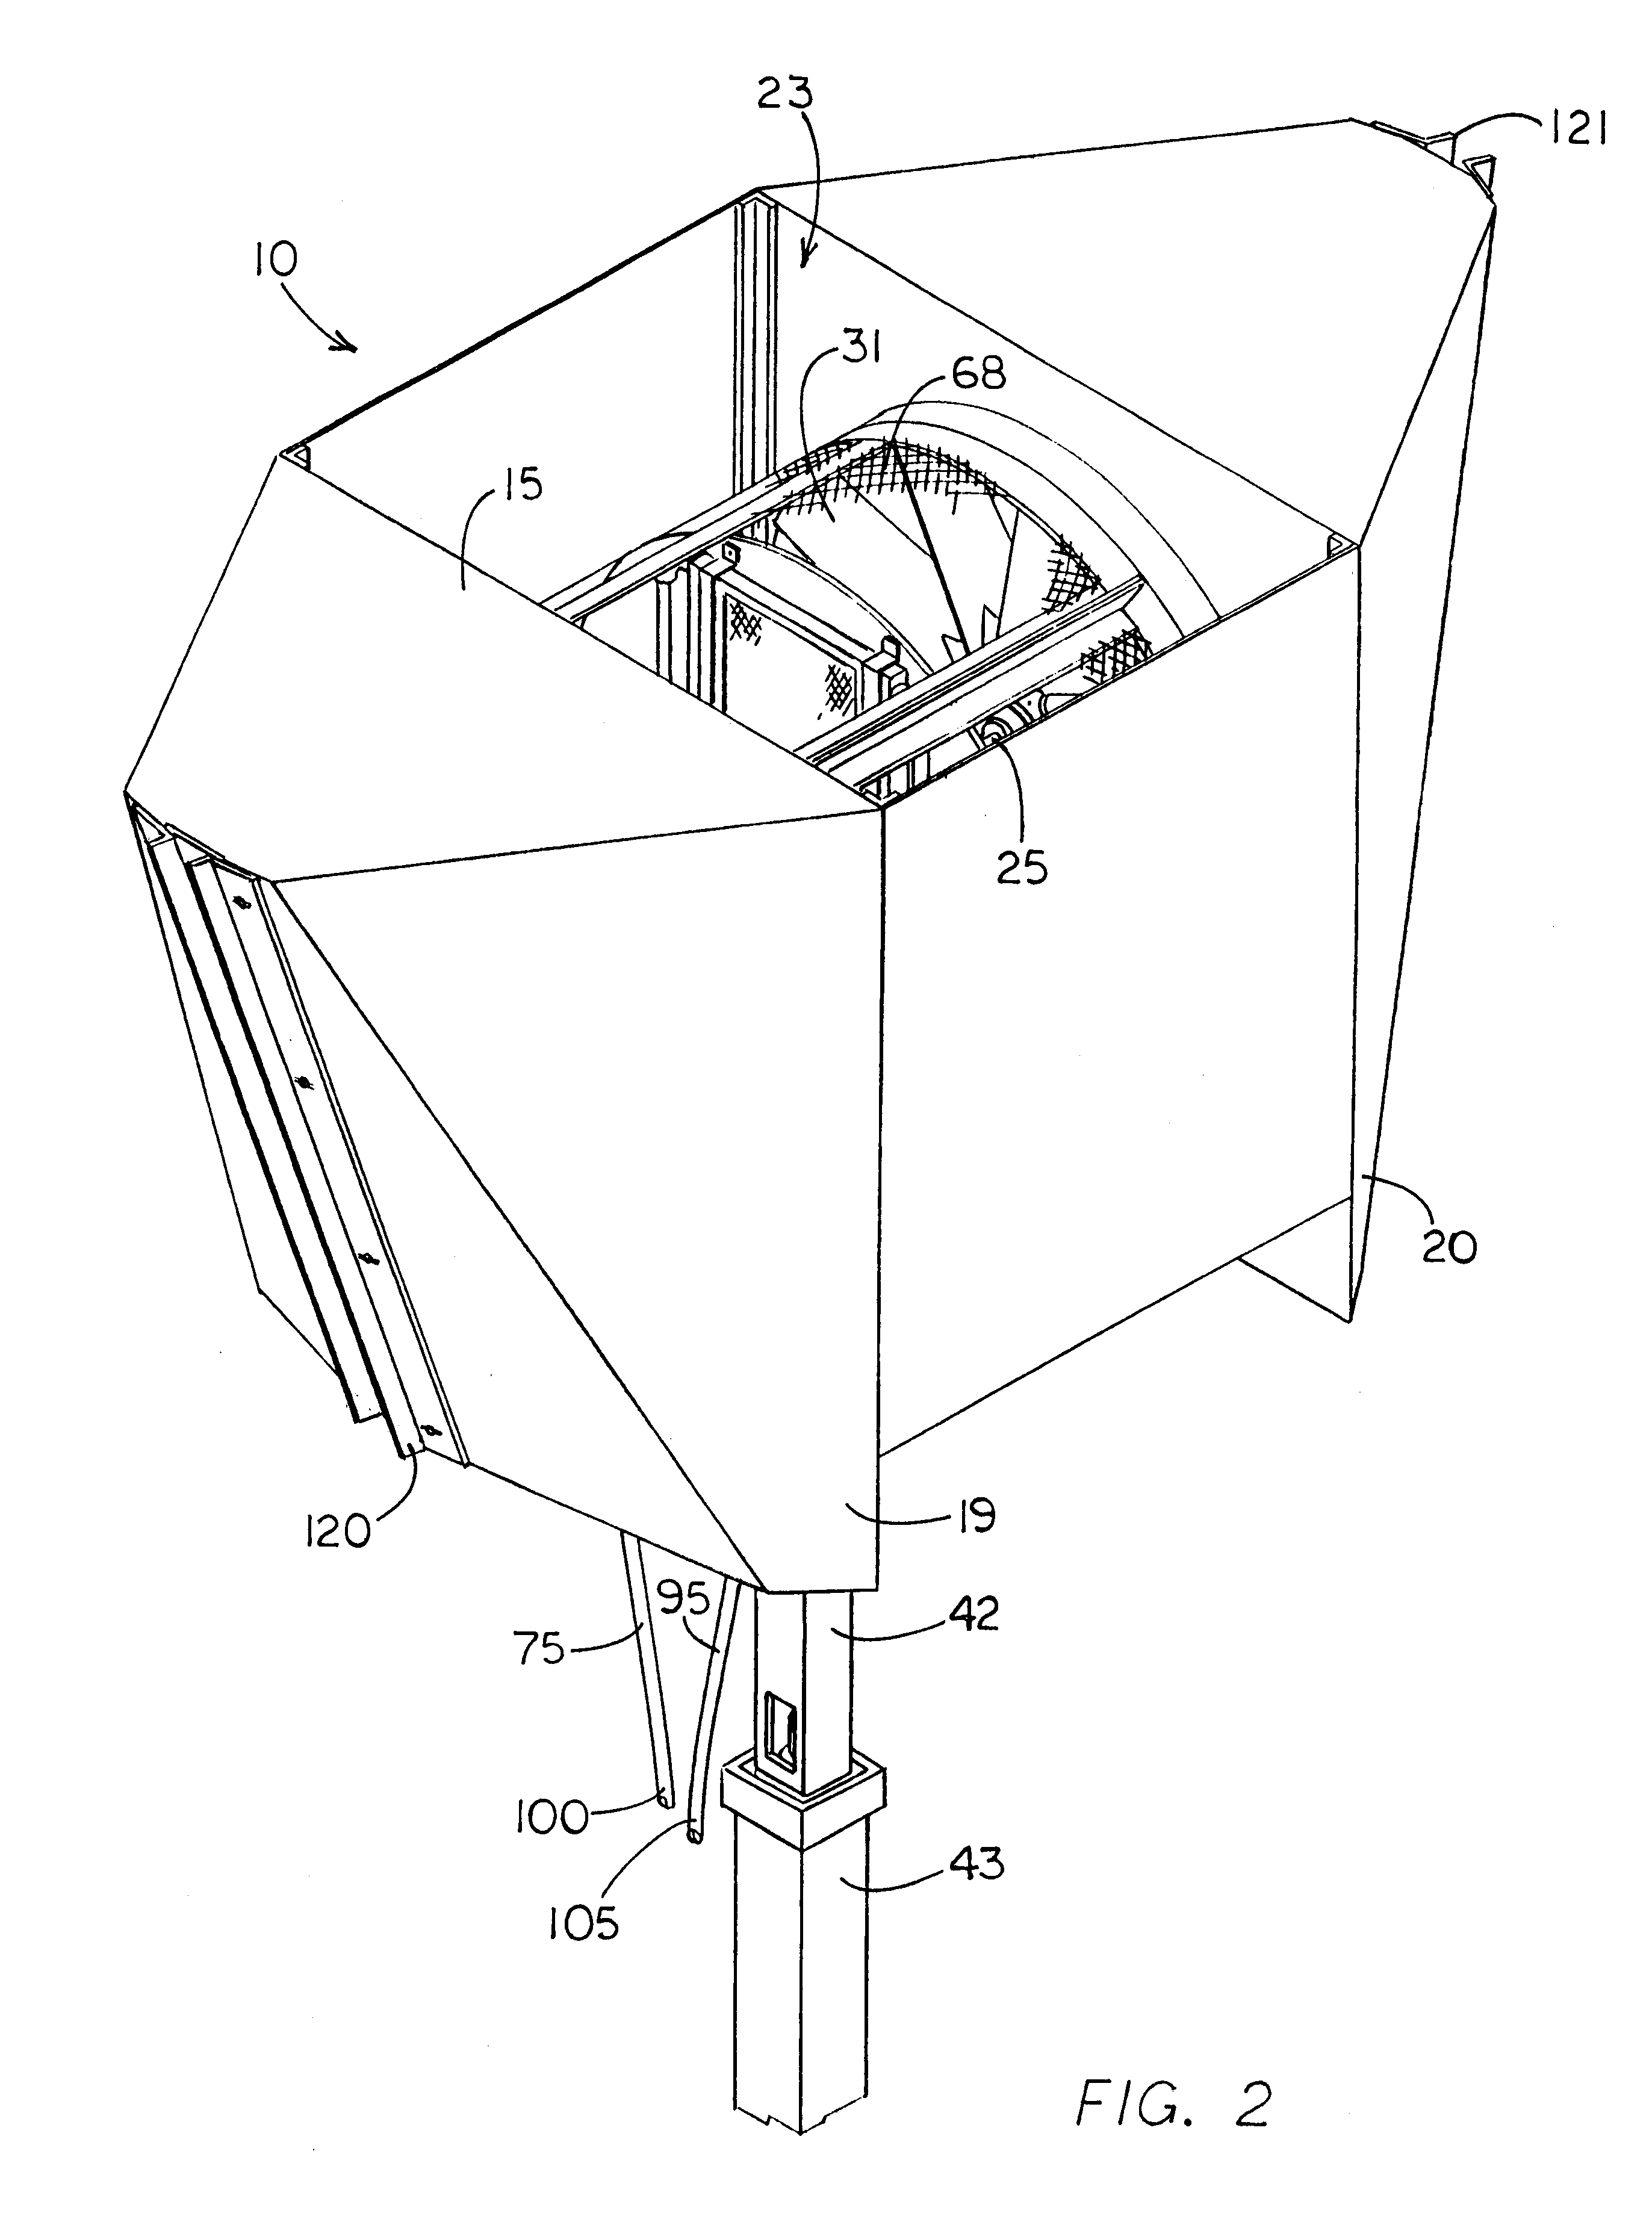 Method and apparatus for an agricultural air handler